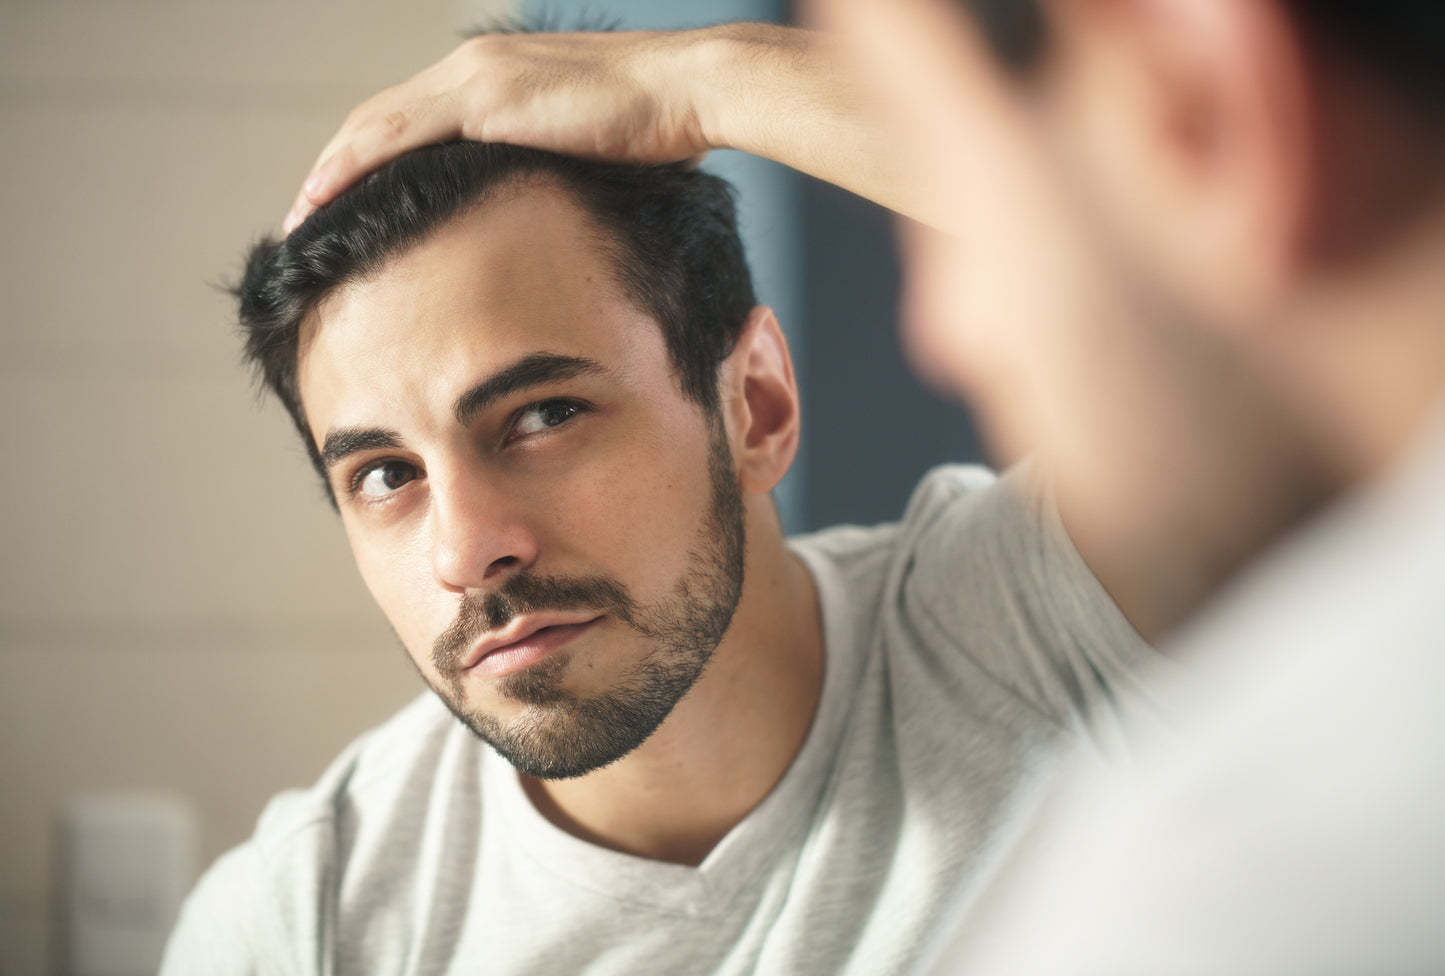 How Long Does the Average Male’s Hair Grow?